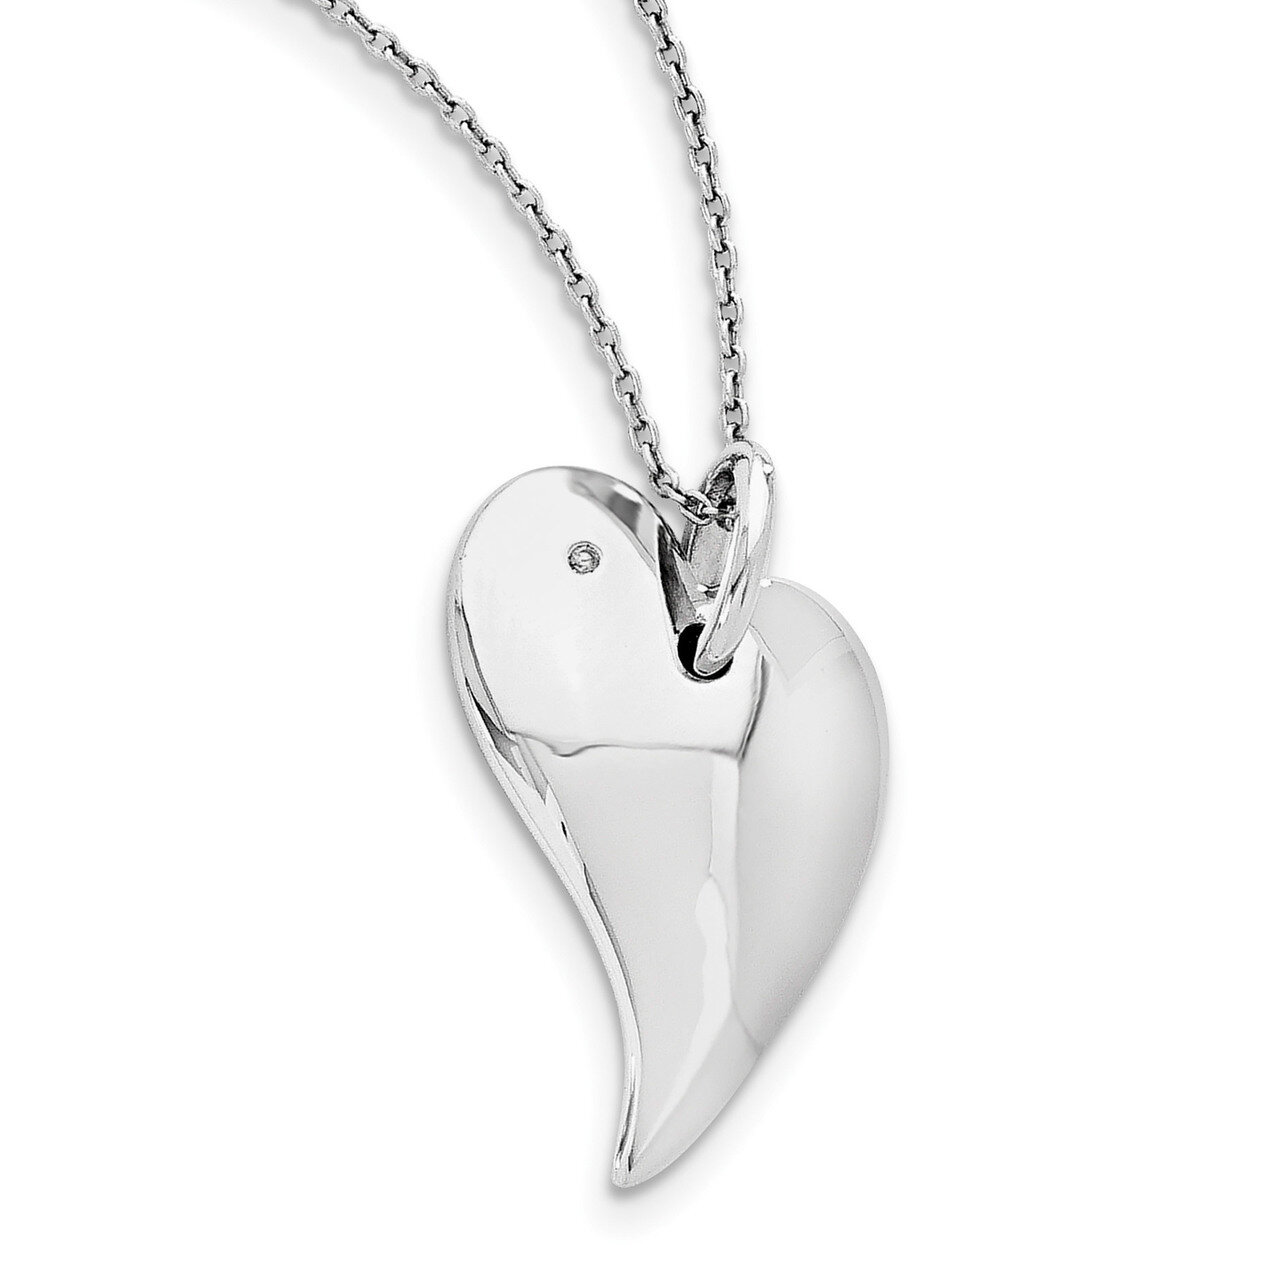 .01Ct. Diamond Heart Necklace Sterling Silver QW268-18